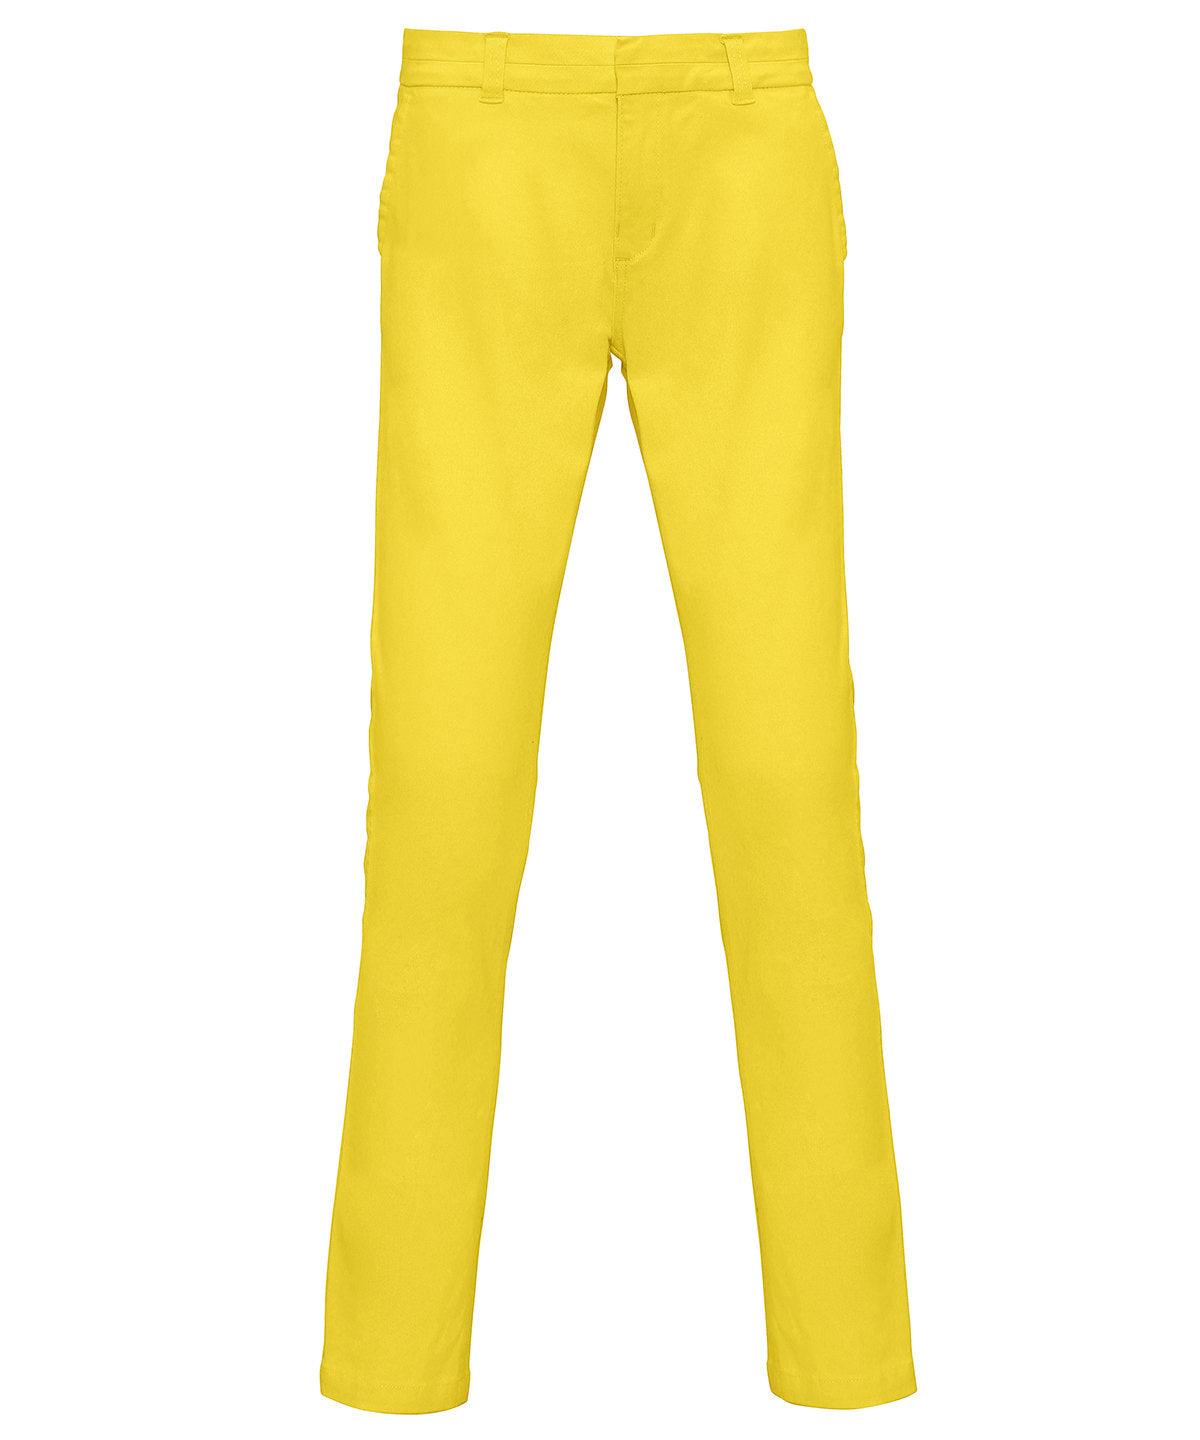 Lemon Zest - Women's chinos Trousers Asquith & Fox Must Haves, Raladeal - Recently Added, Tailoring, Trousers & Shorts, Women's Fashion Schoolwear Centres